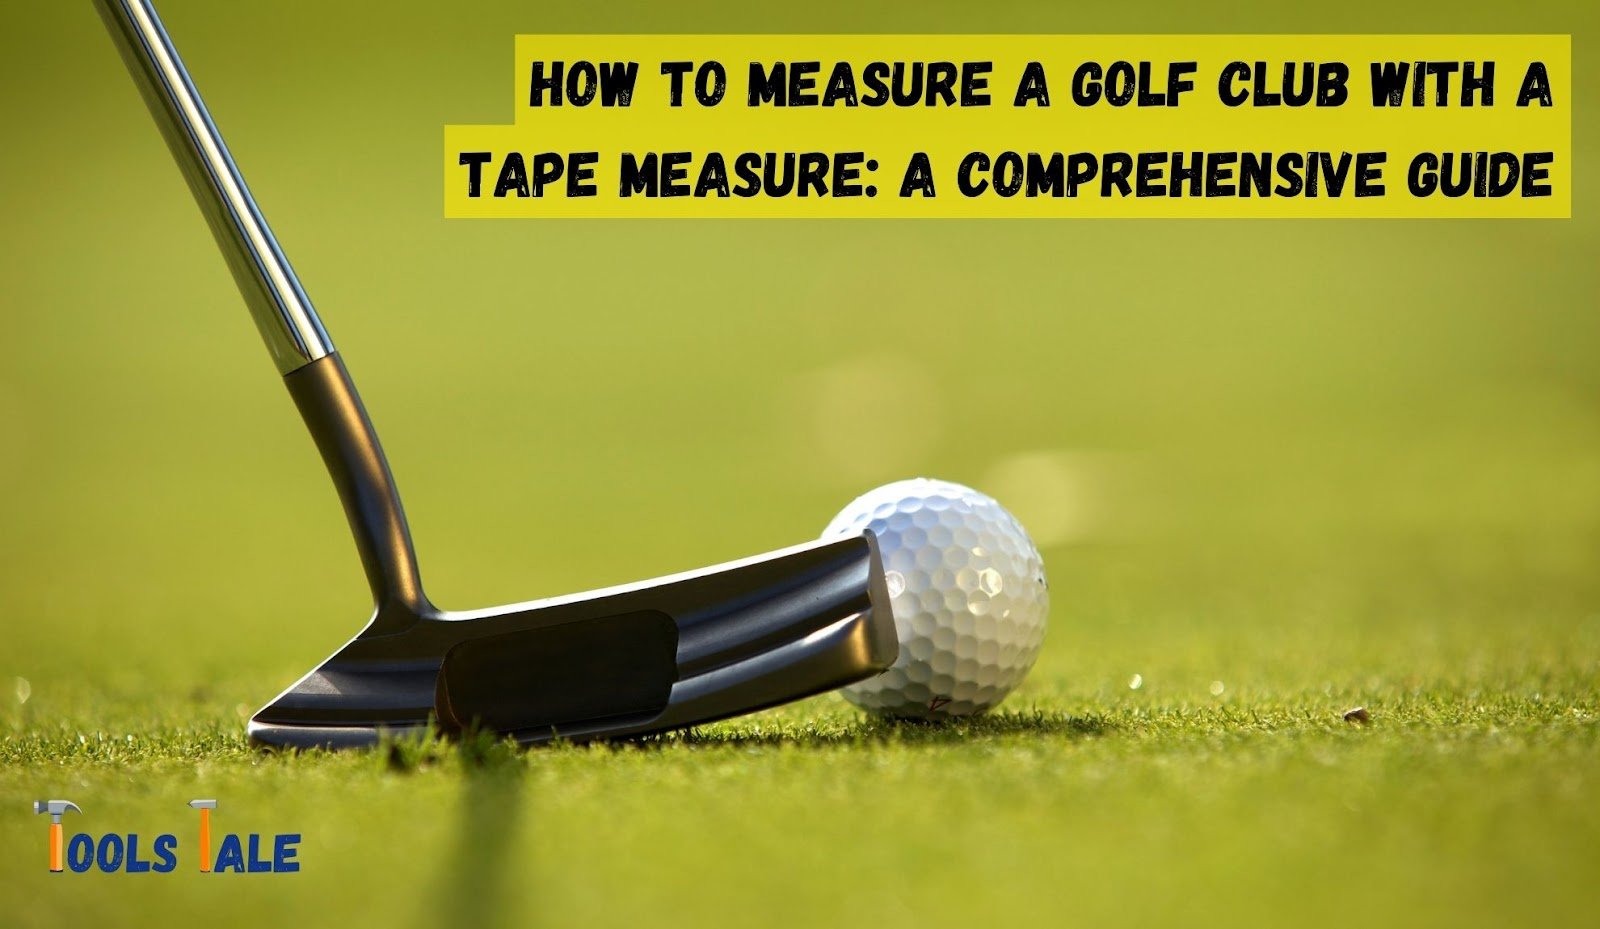 How to measure a golf club with a tape measure